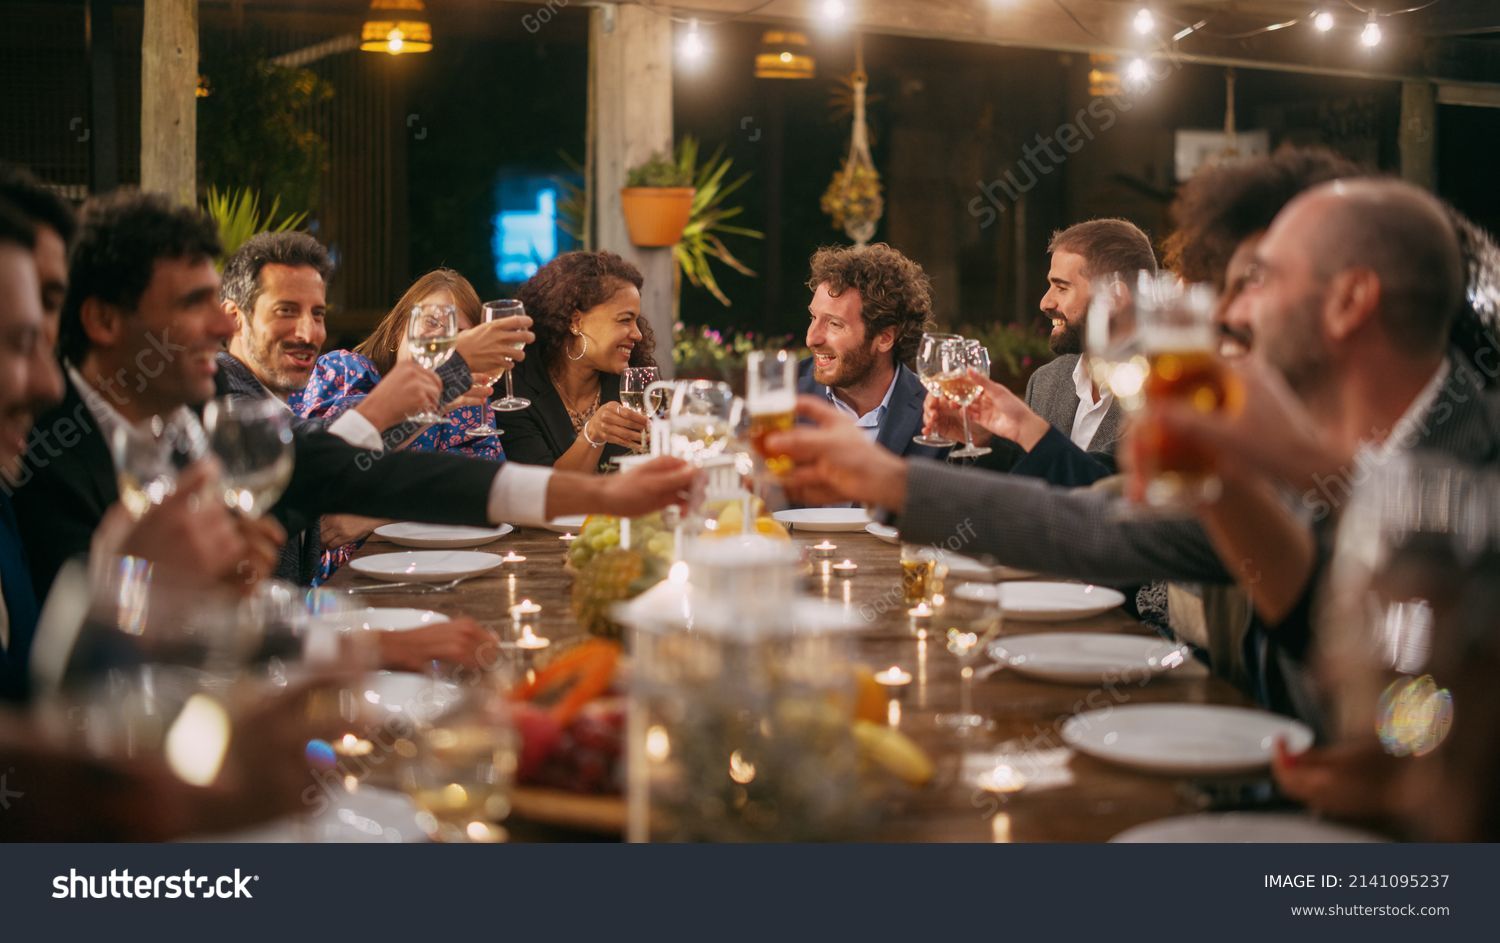 Big Dinner Party with a Small Crowd of Multiethnic Diverse Friends Celebrating at a Restaurant. Beautiful Happy Hosts Propose a Toast and Raise Wine Glasses while Sitting at a Table in the Evening. #2141095237